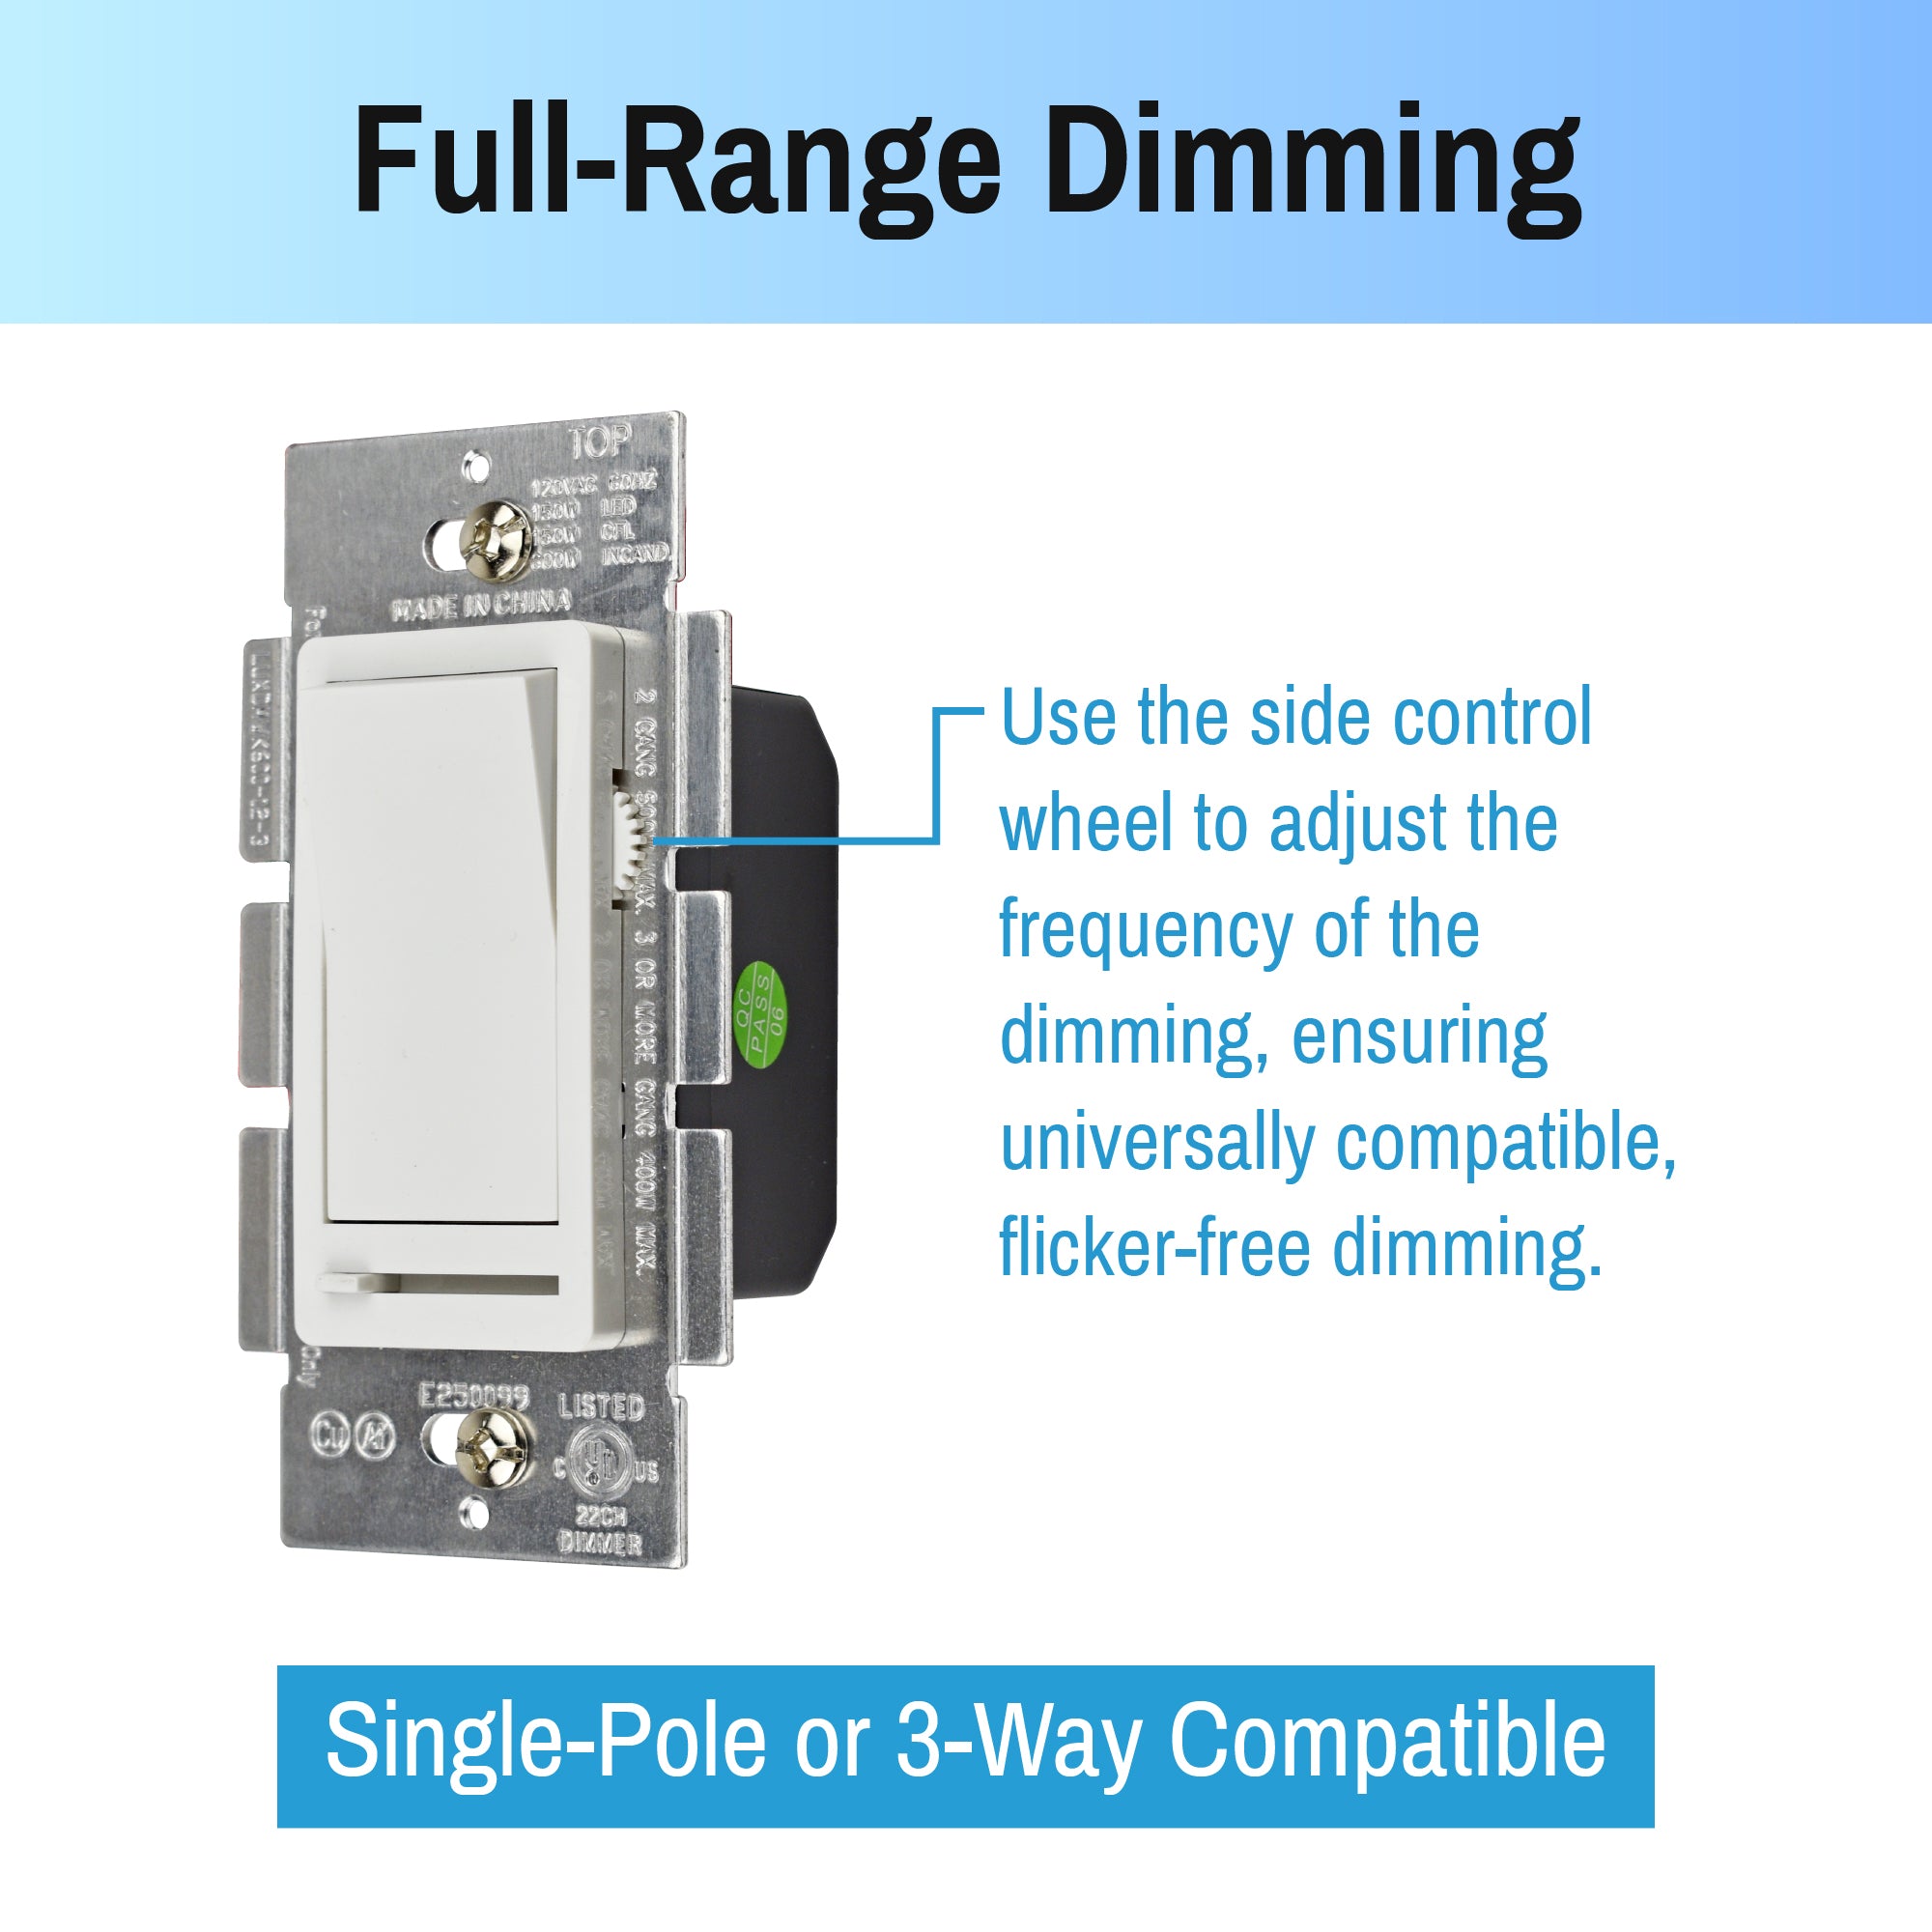 Smart Touch LED Dimmer Switch - 120V TRIAC